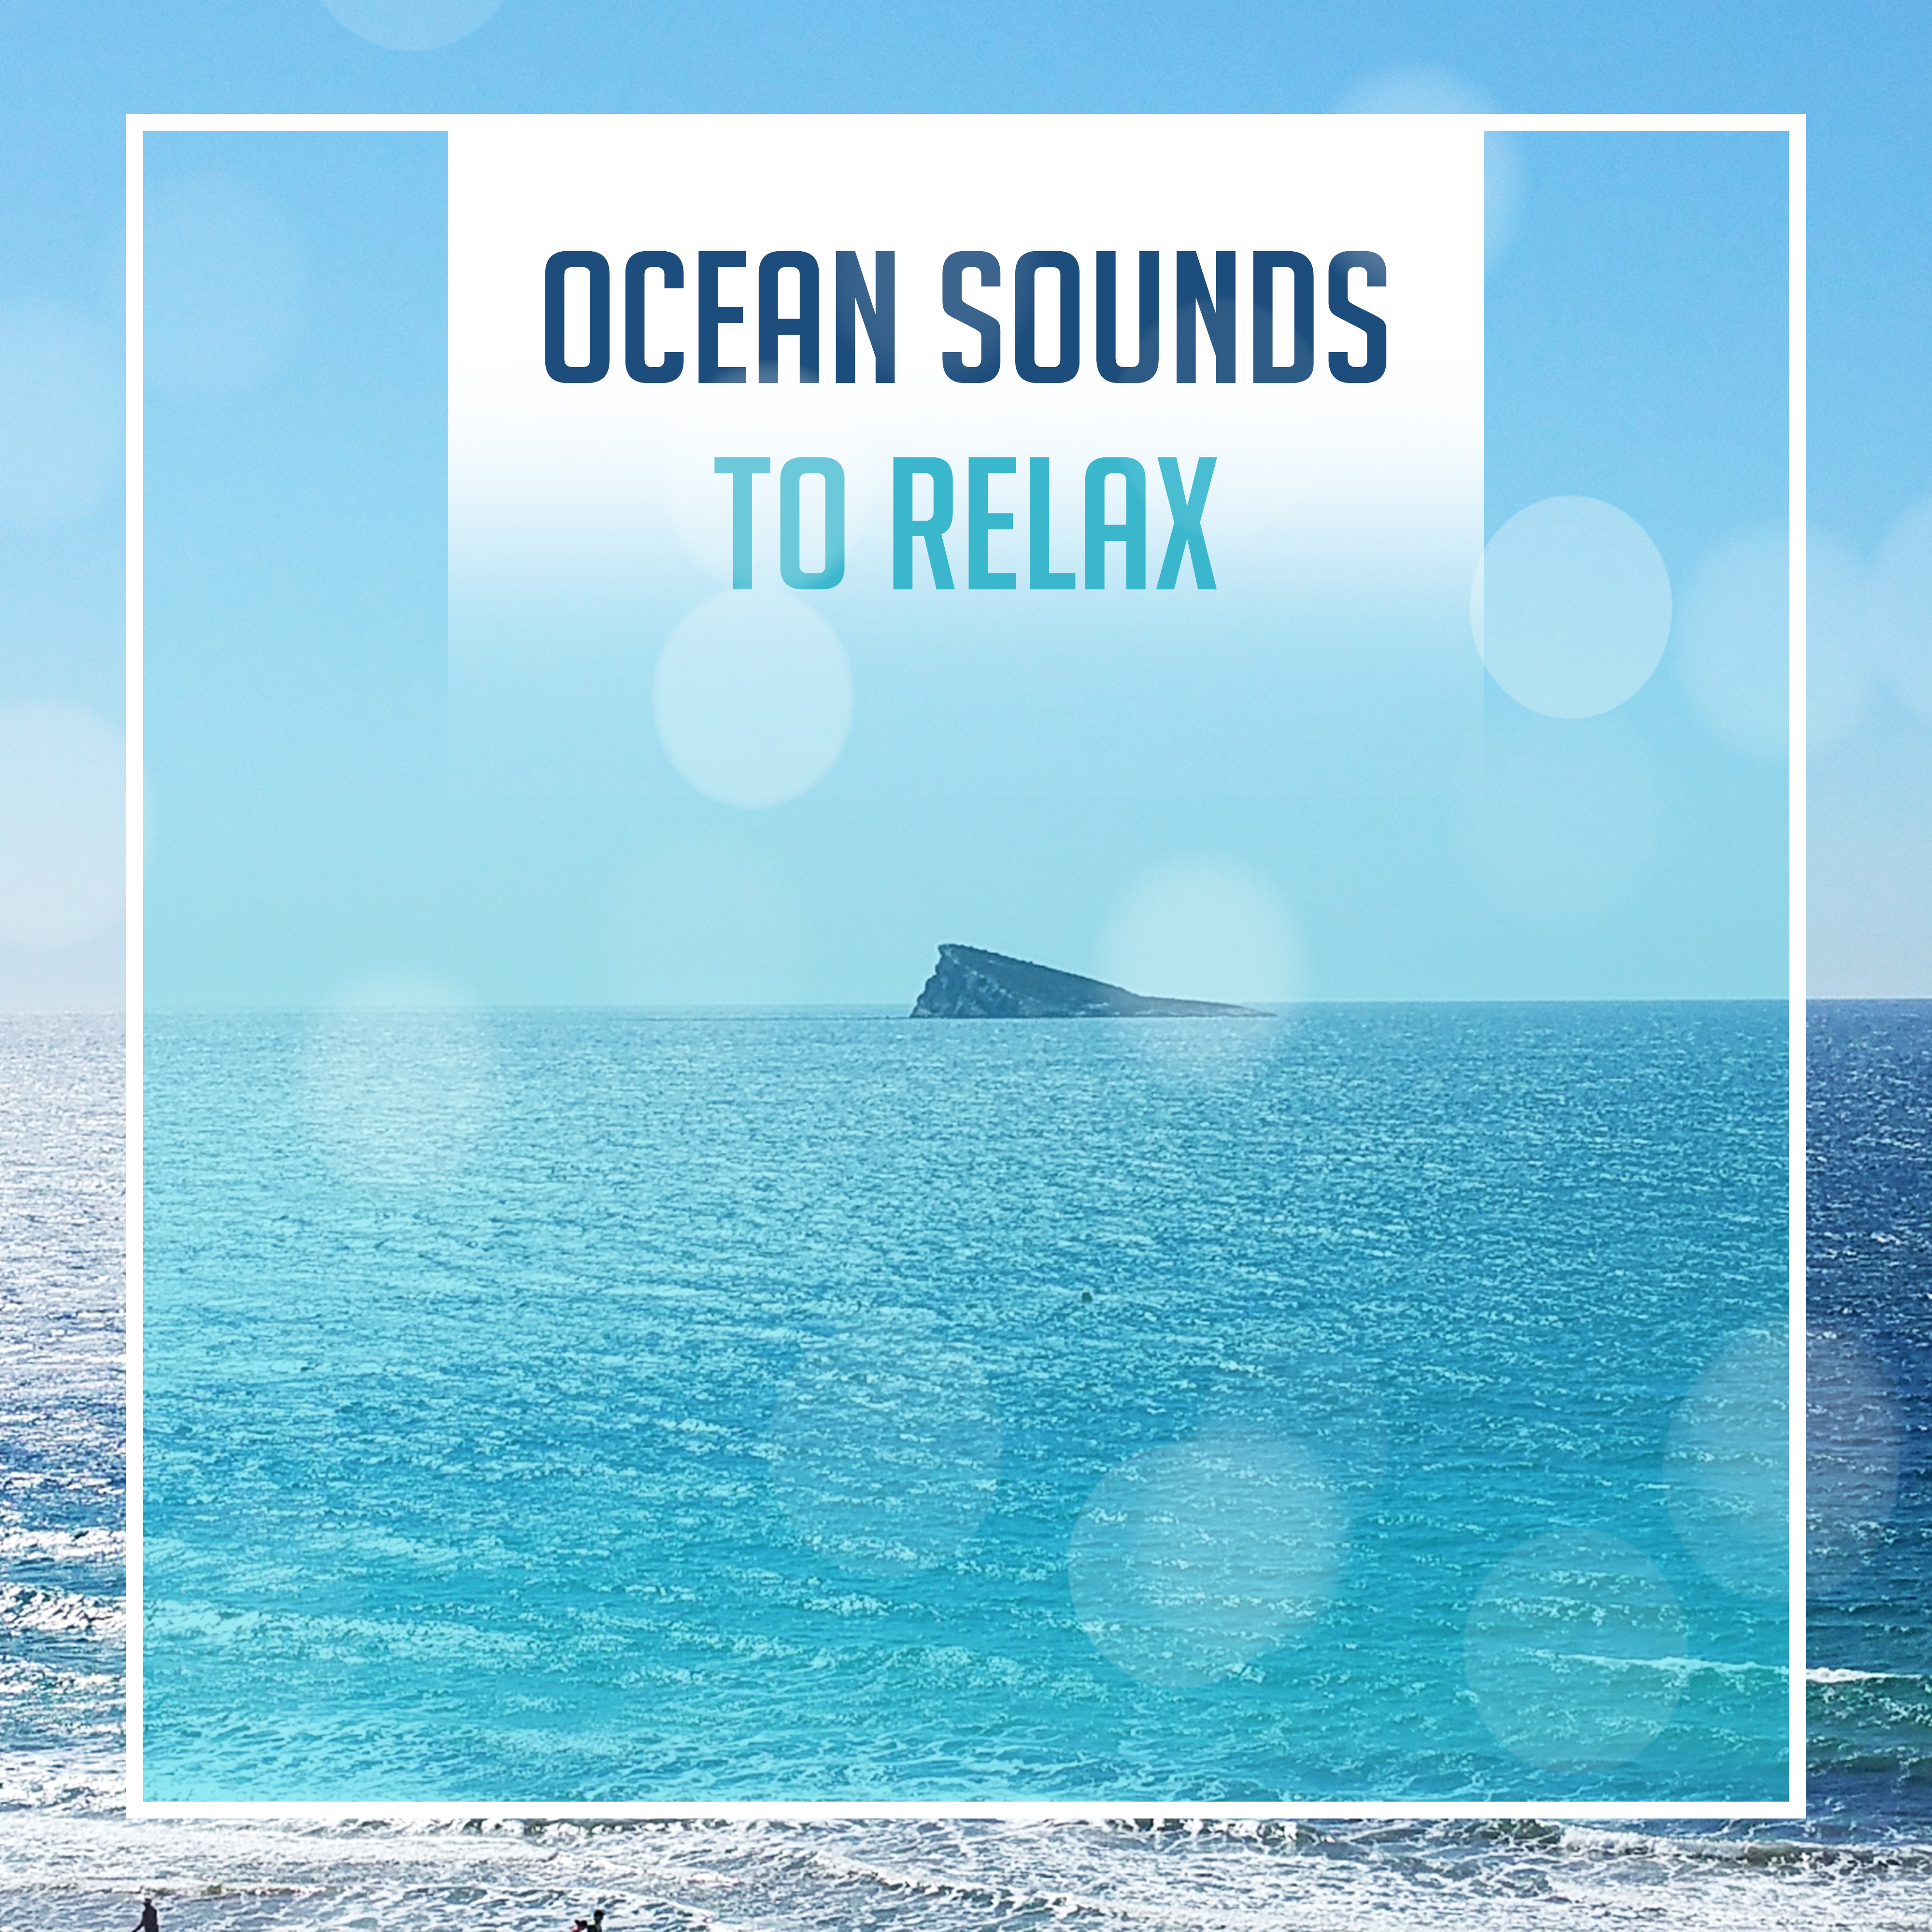 Ocean Sounds to Relax – Calming Water Sounds, Healing Waves, Inner Peace, Stress Relief